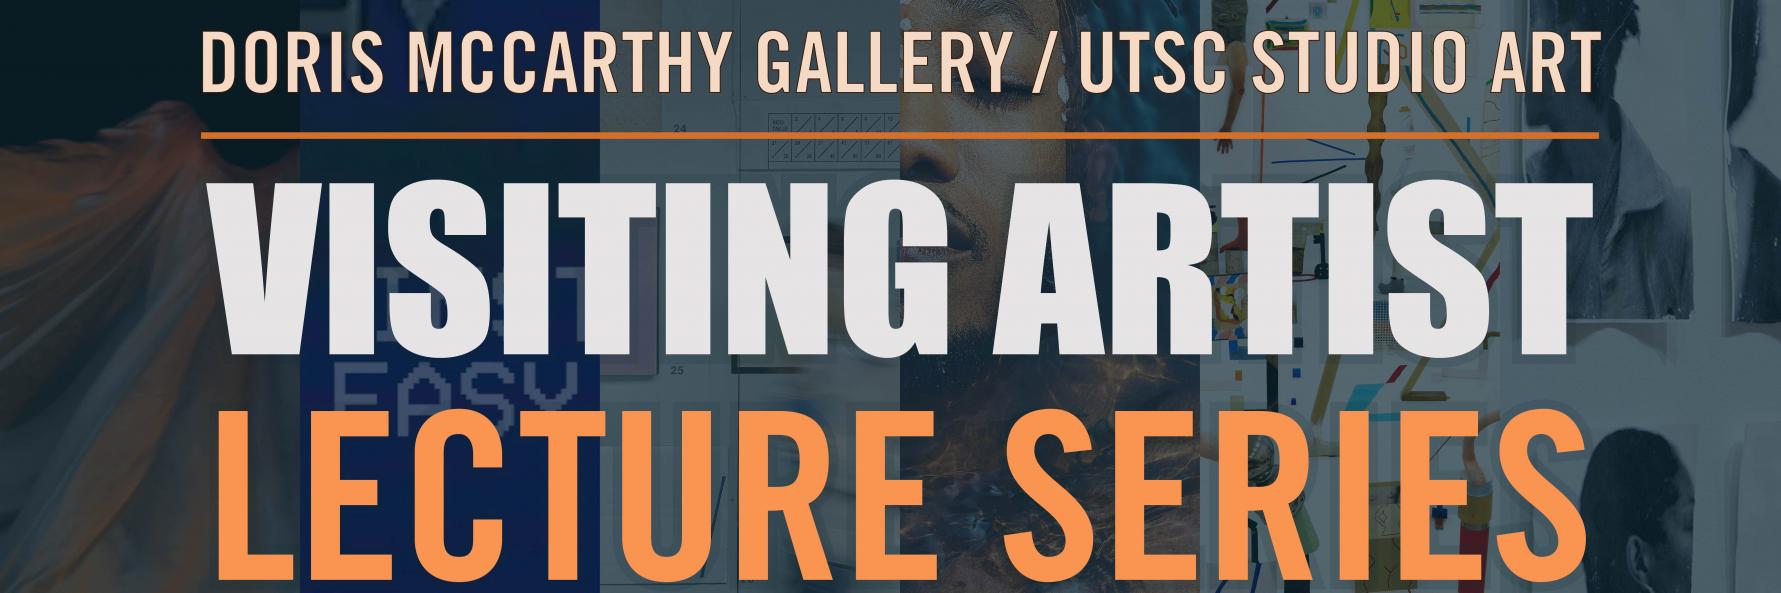 Visiting Artist Lecture Series Winter 2021 Banner